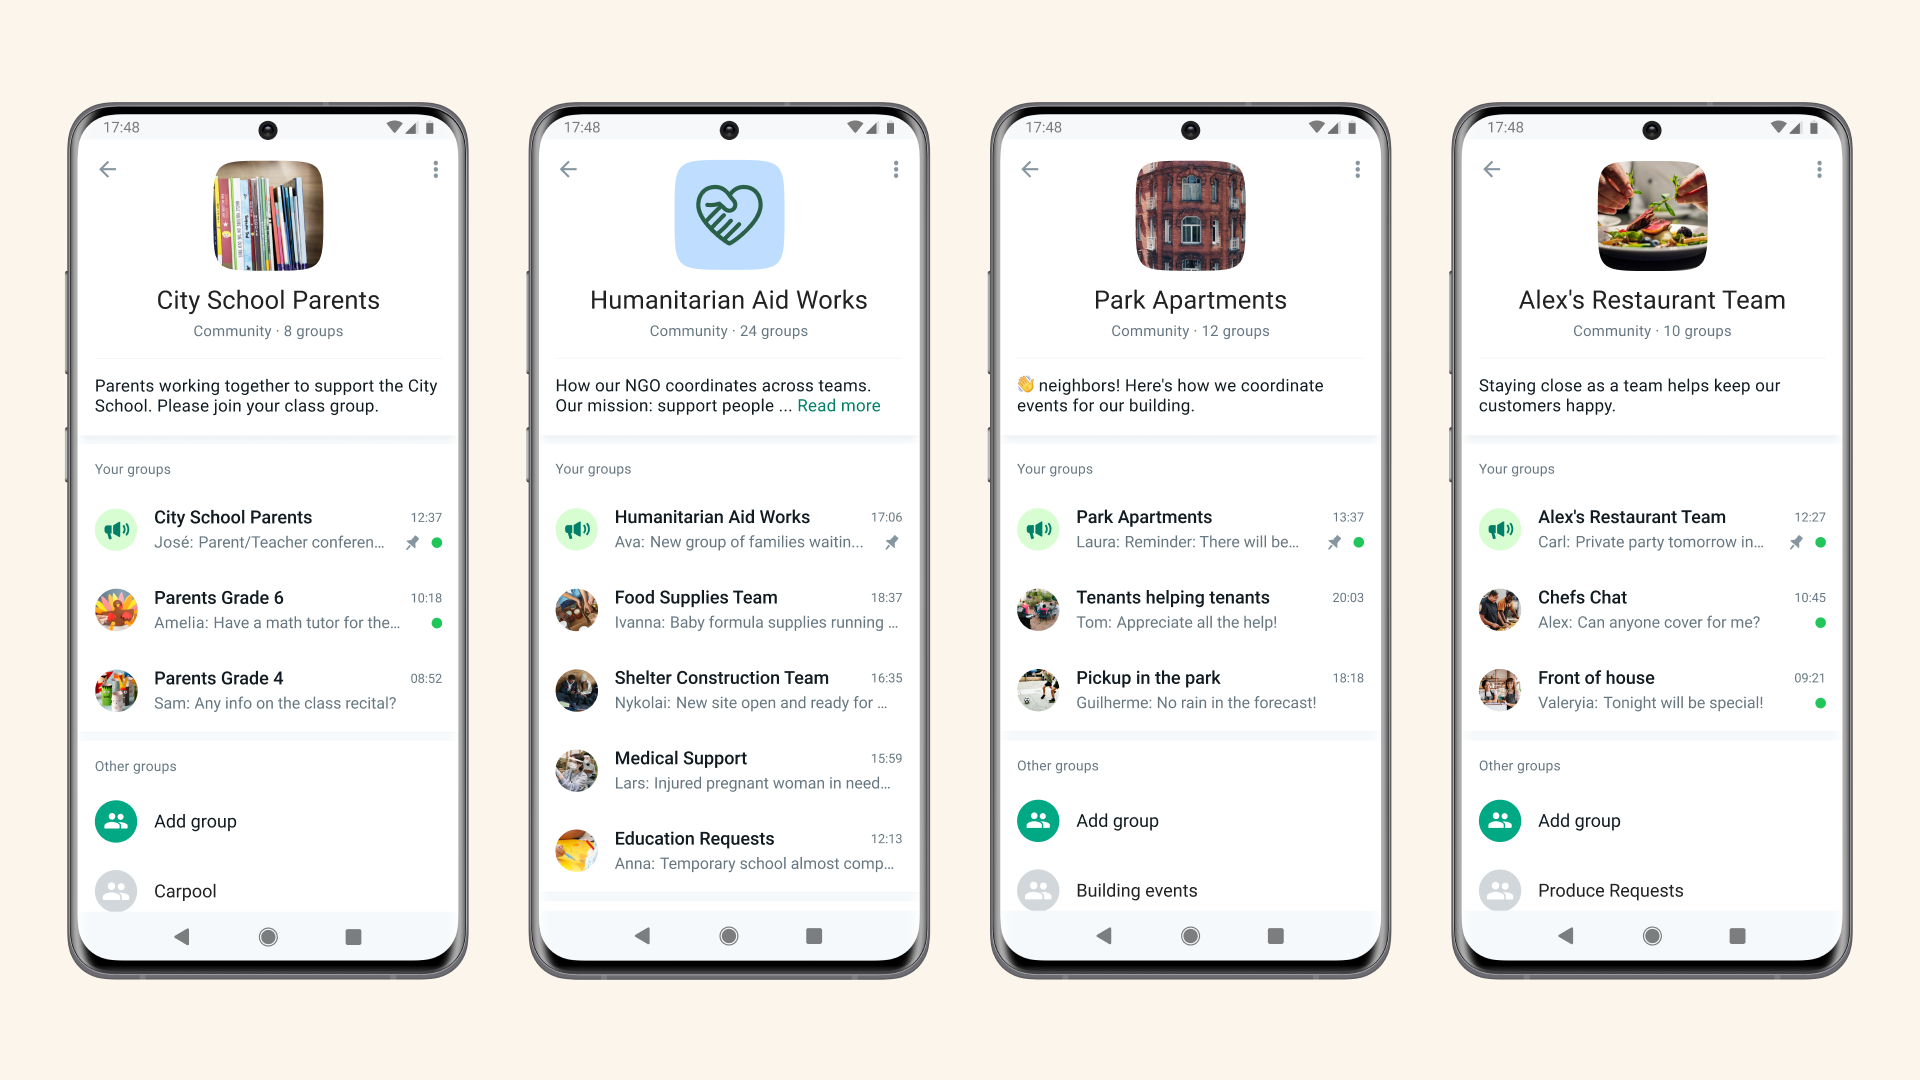 WhatsApp officially launches its new discussion group feature, Communities  | TechCrunch